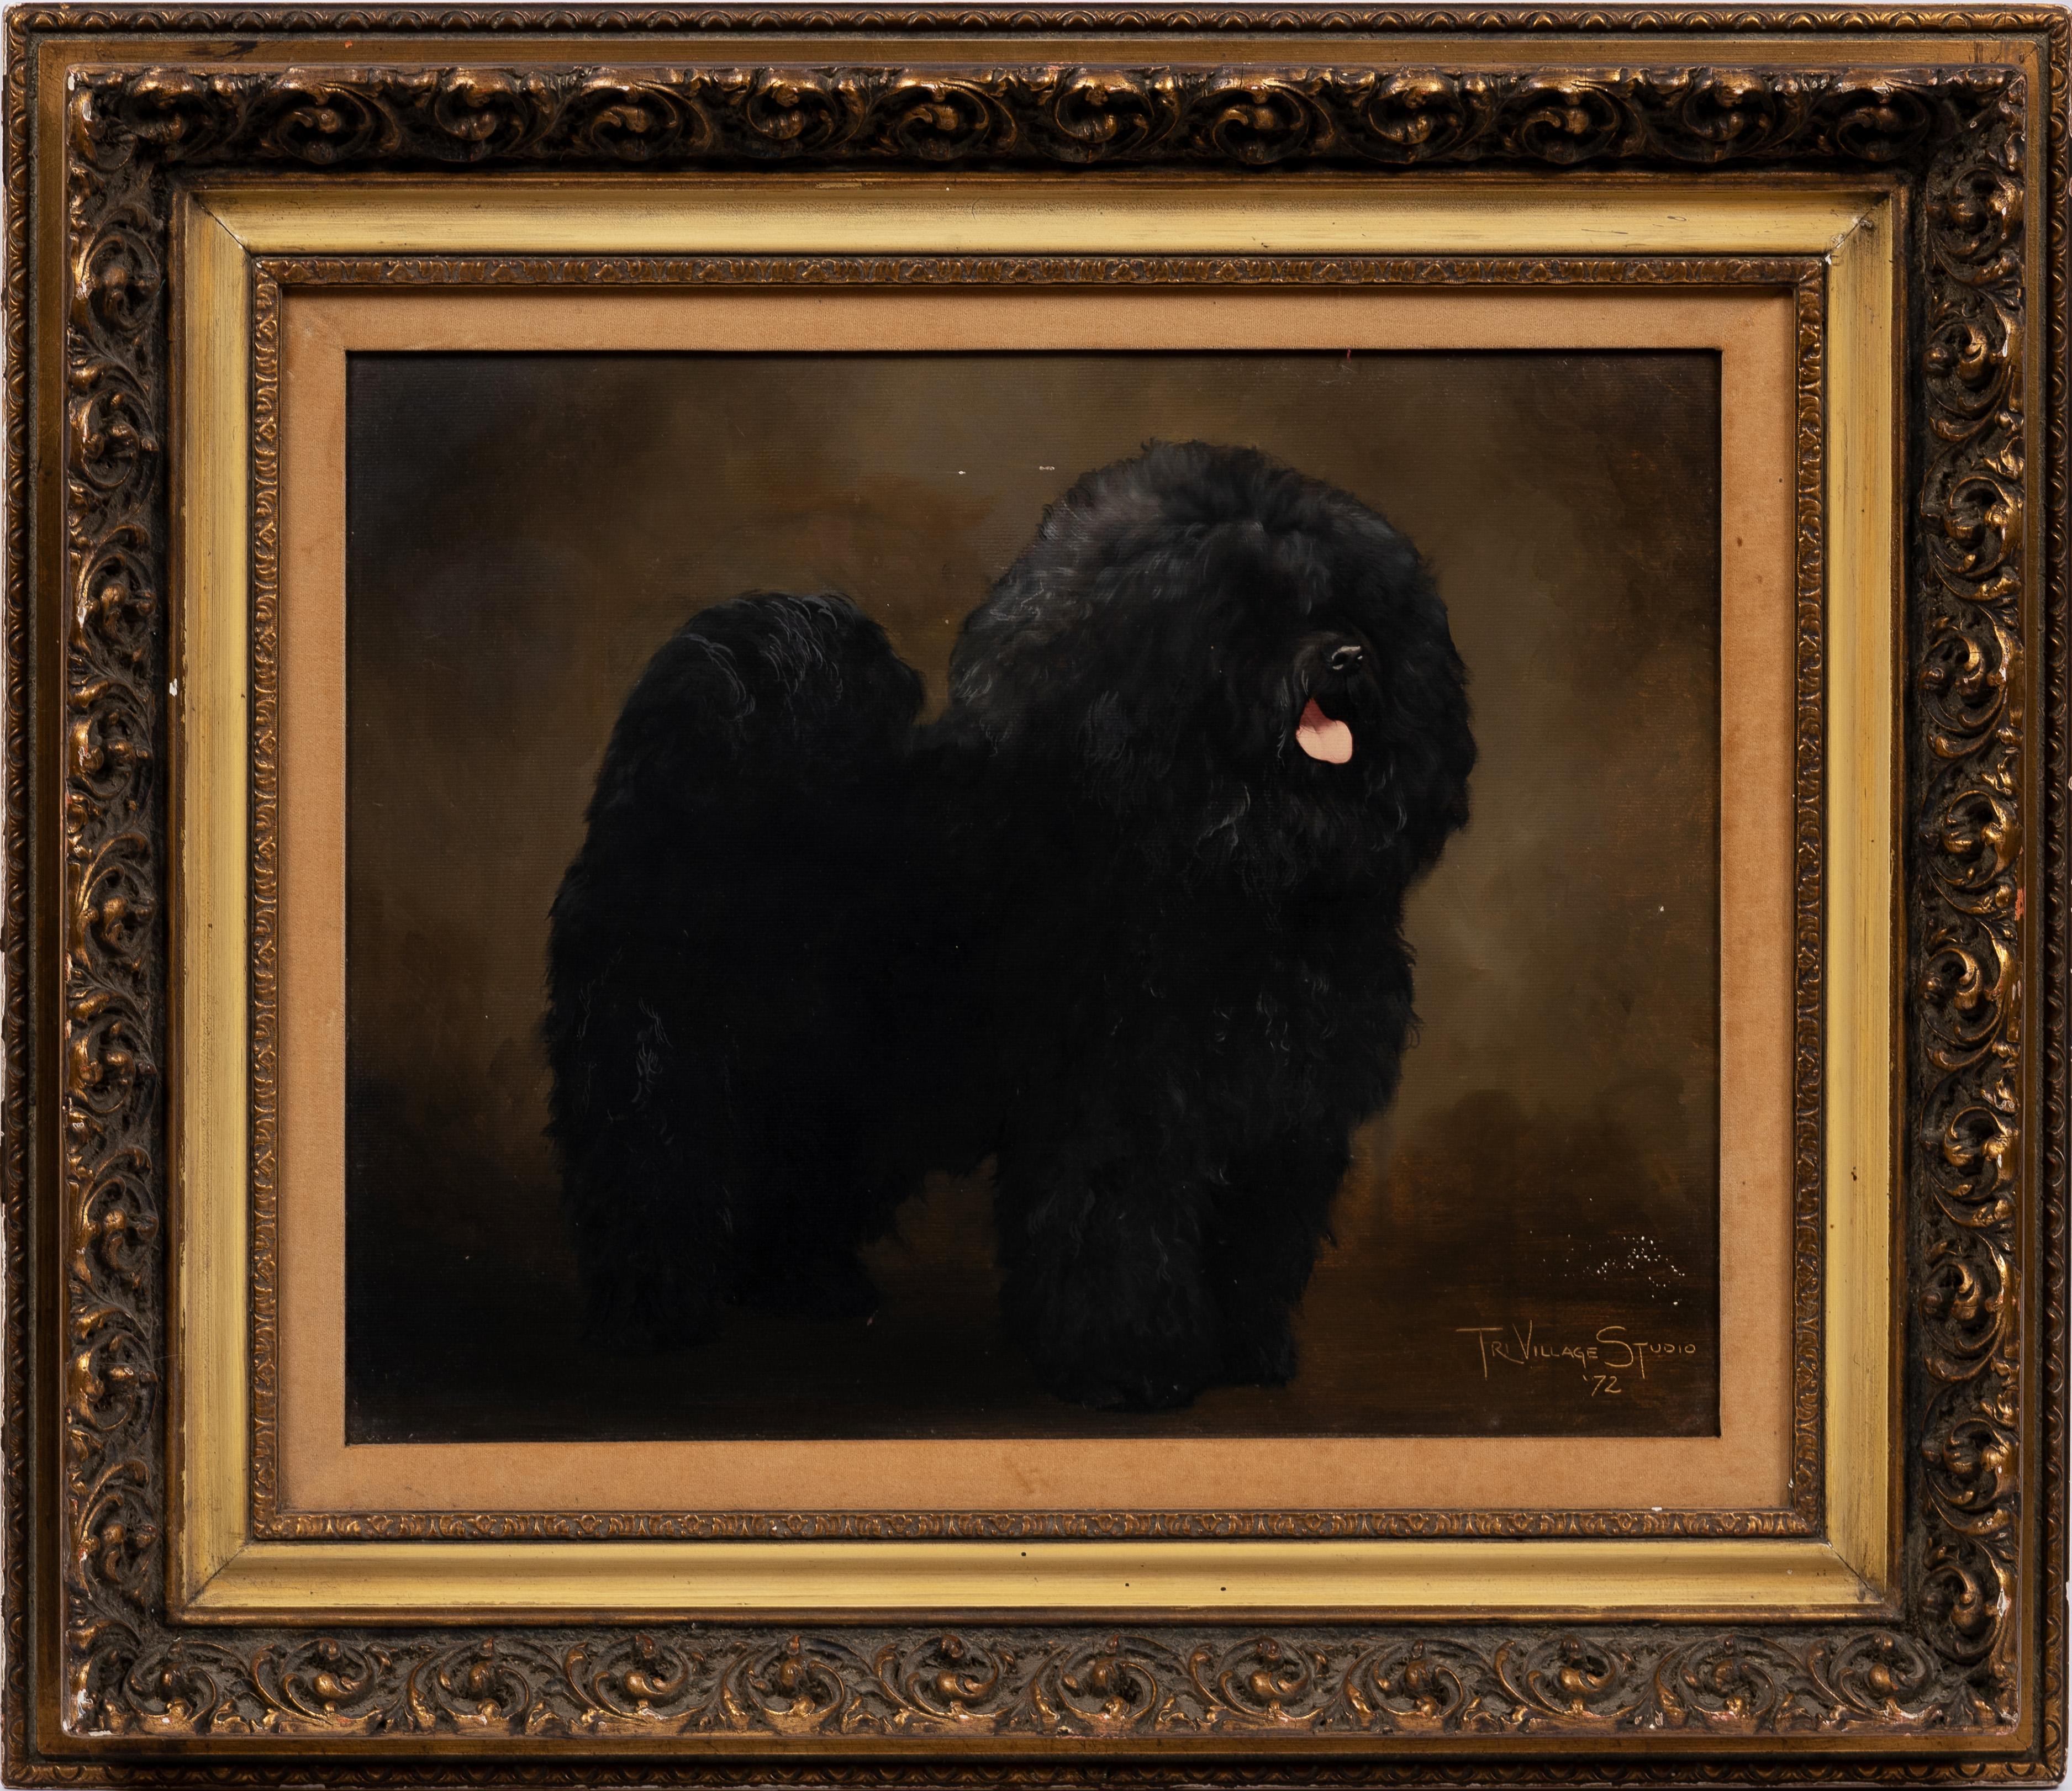 Vintage American Signed Shaggy Dog Portrait Framed Animal Oil Painting - Black Interior Painting by Unknown